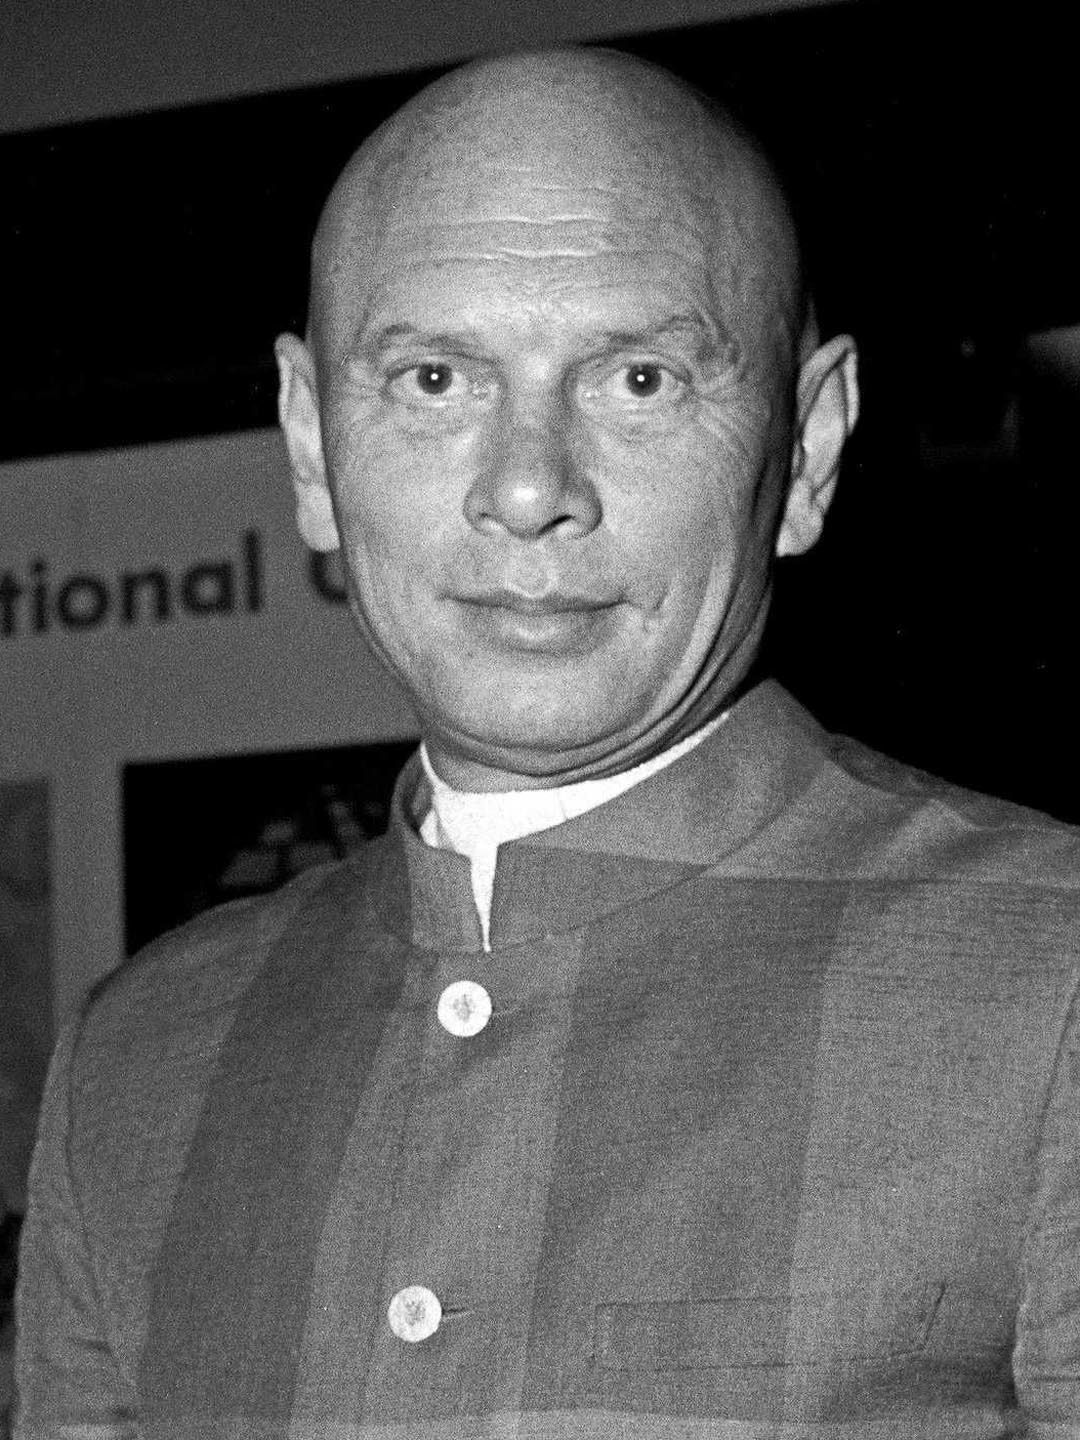 How tall is Yul Brynner?